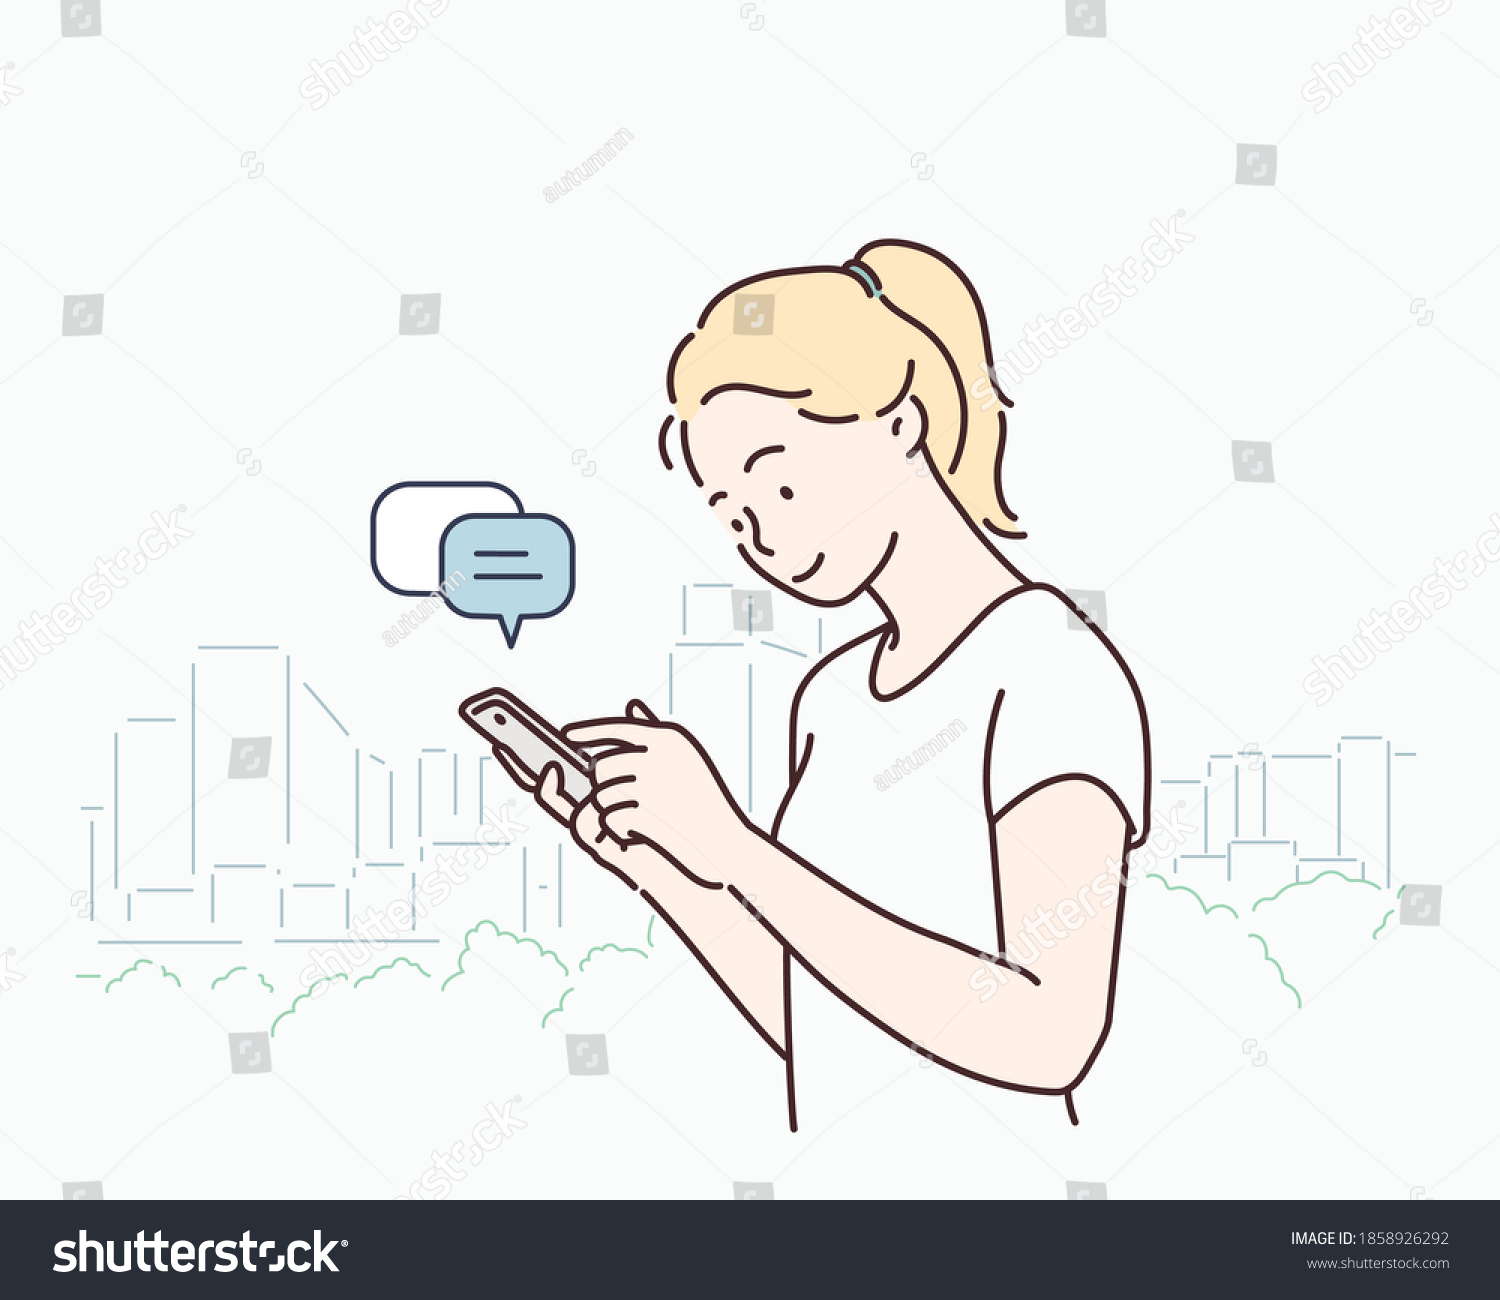 Young Woman Smartphone Hand Drawn Style Stock Vector Royalty Free 1858926292 0910